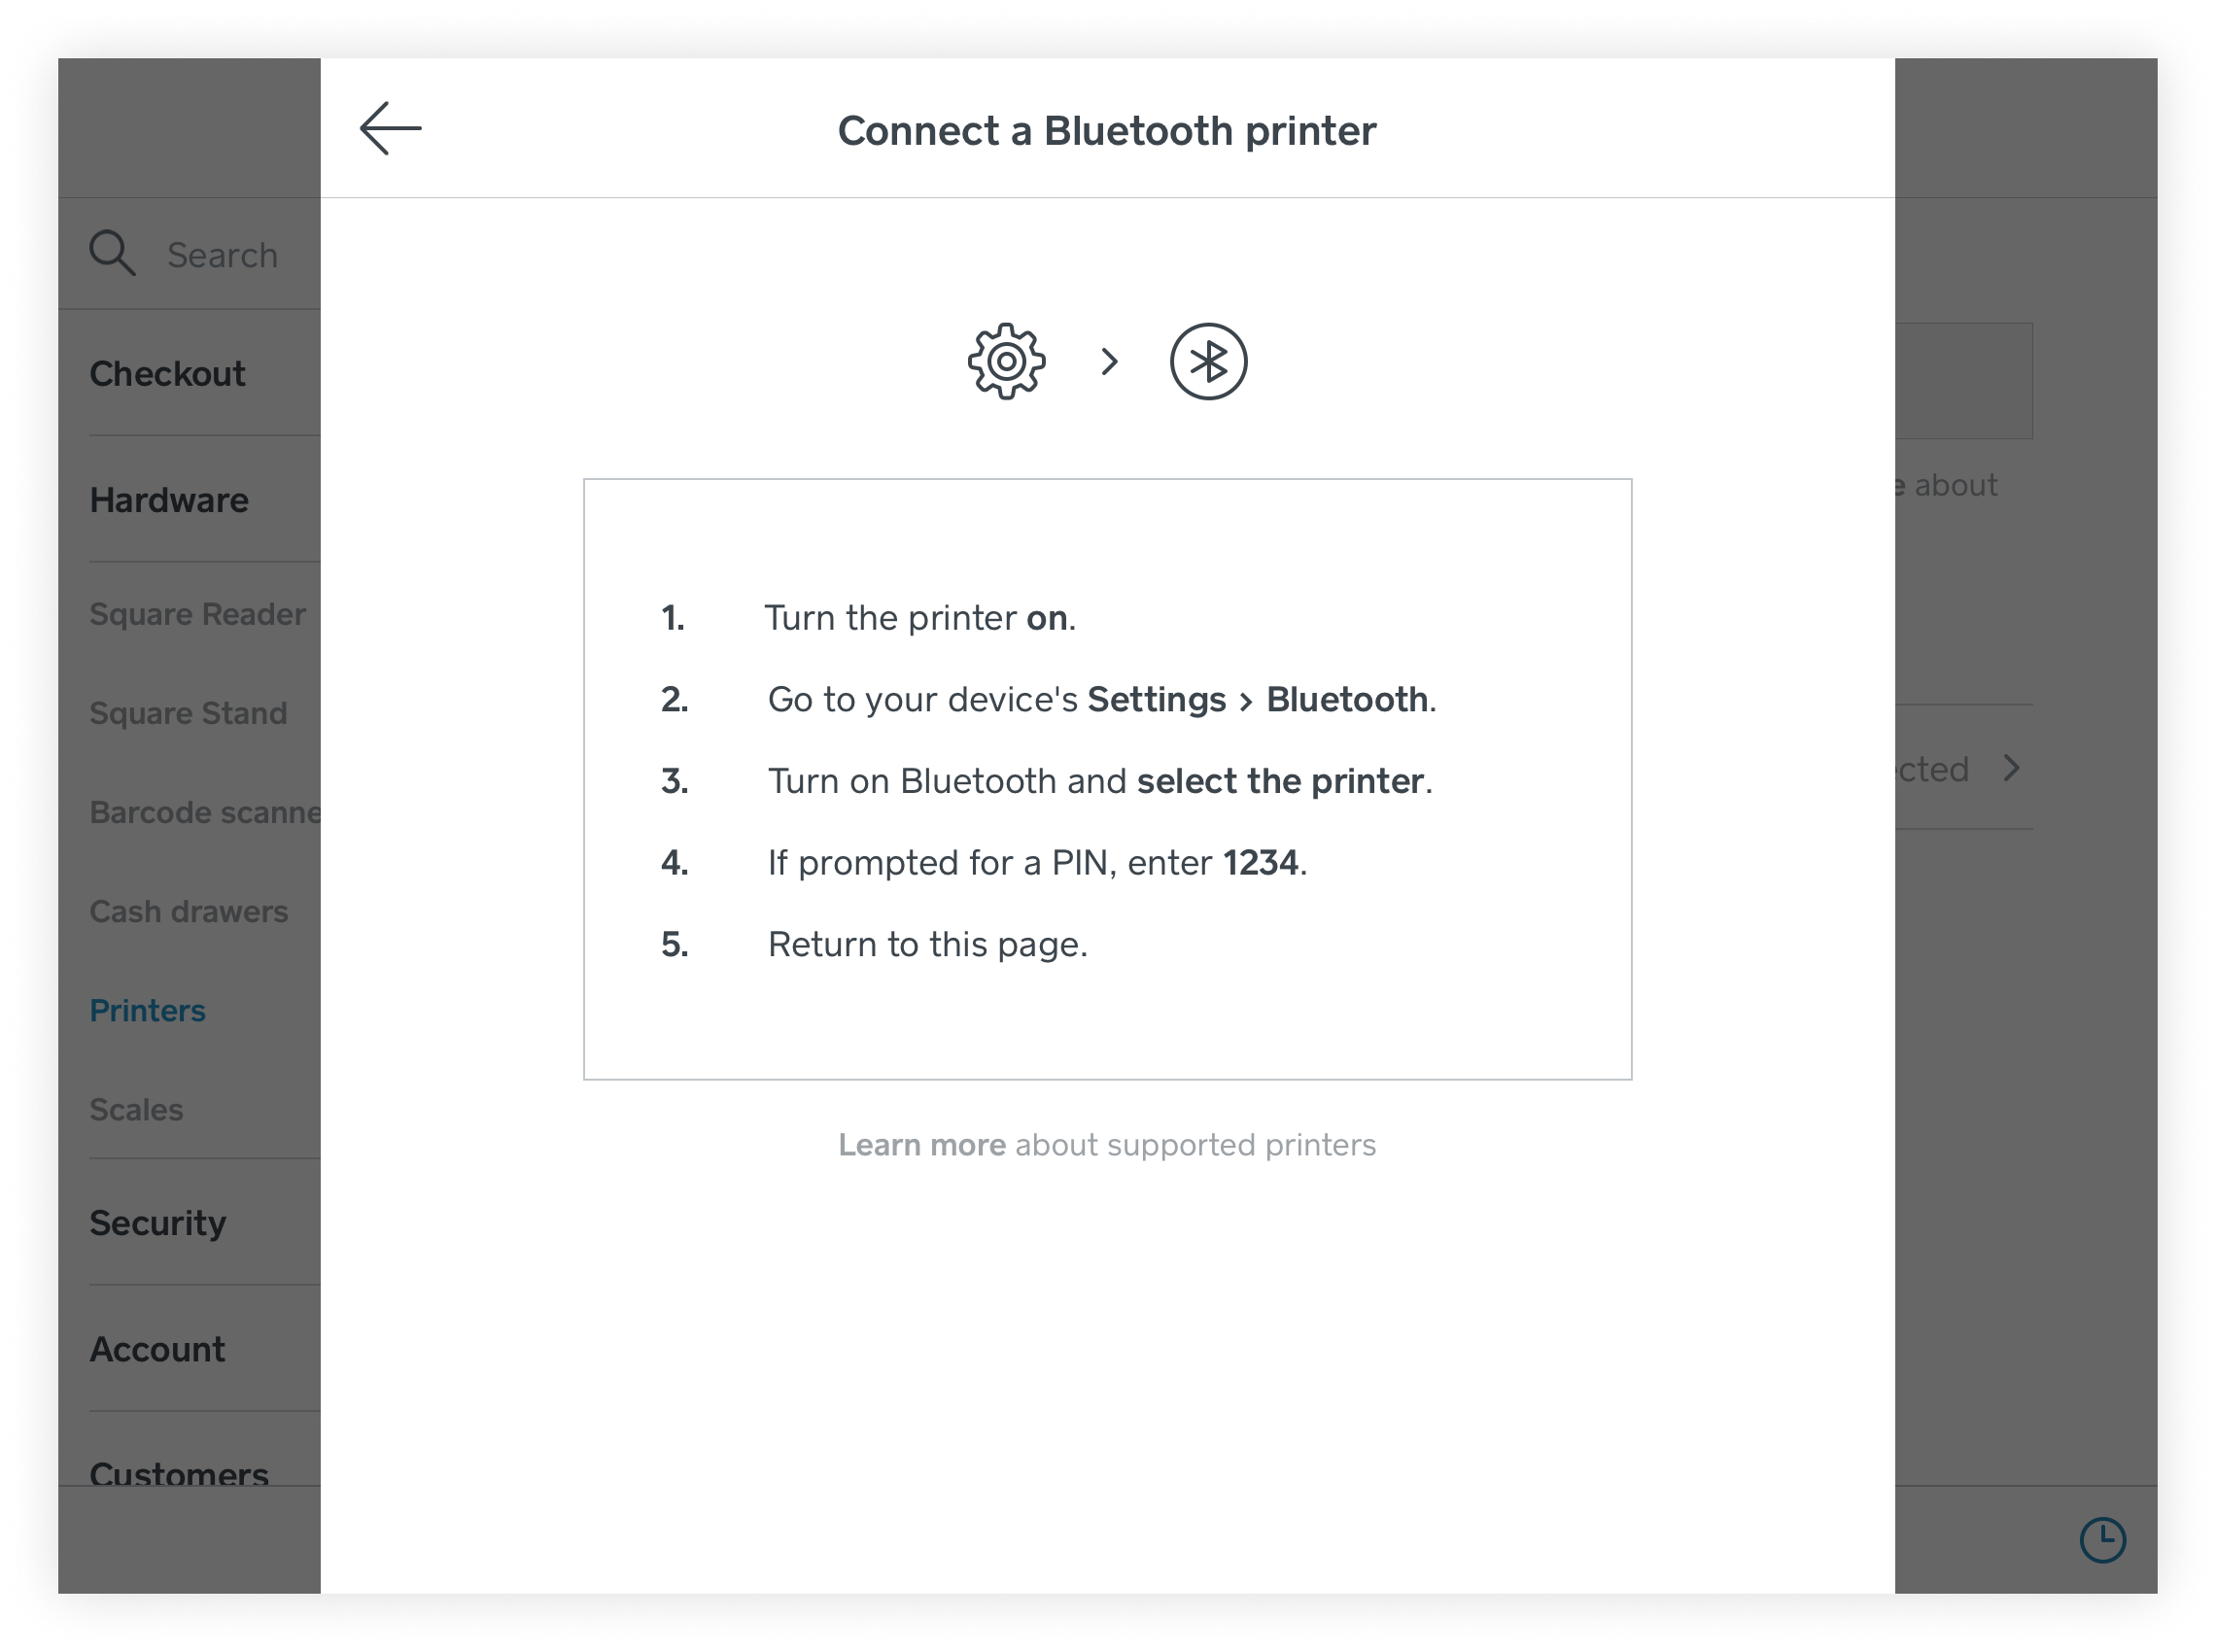 Connect Printer: Turn on printer, Navigate to bluetooth settings on iPad, select Star Micronics, enter PIN number of 1234